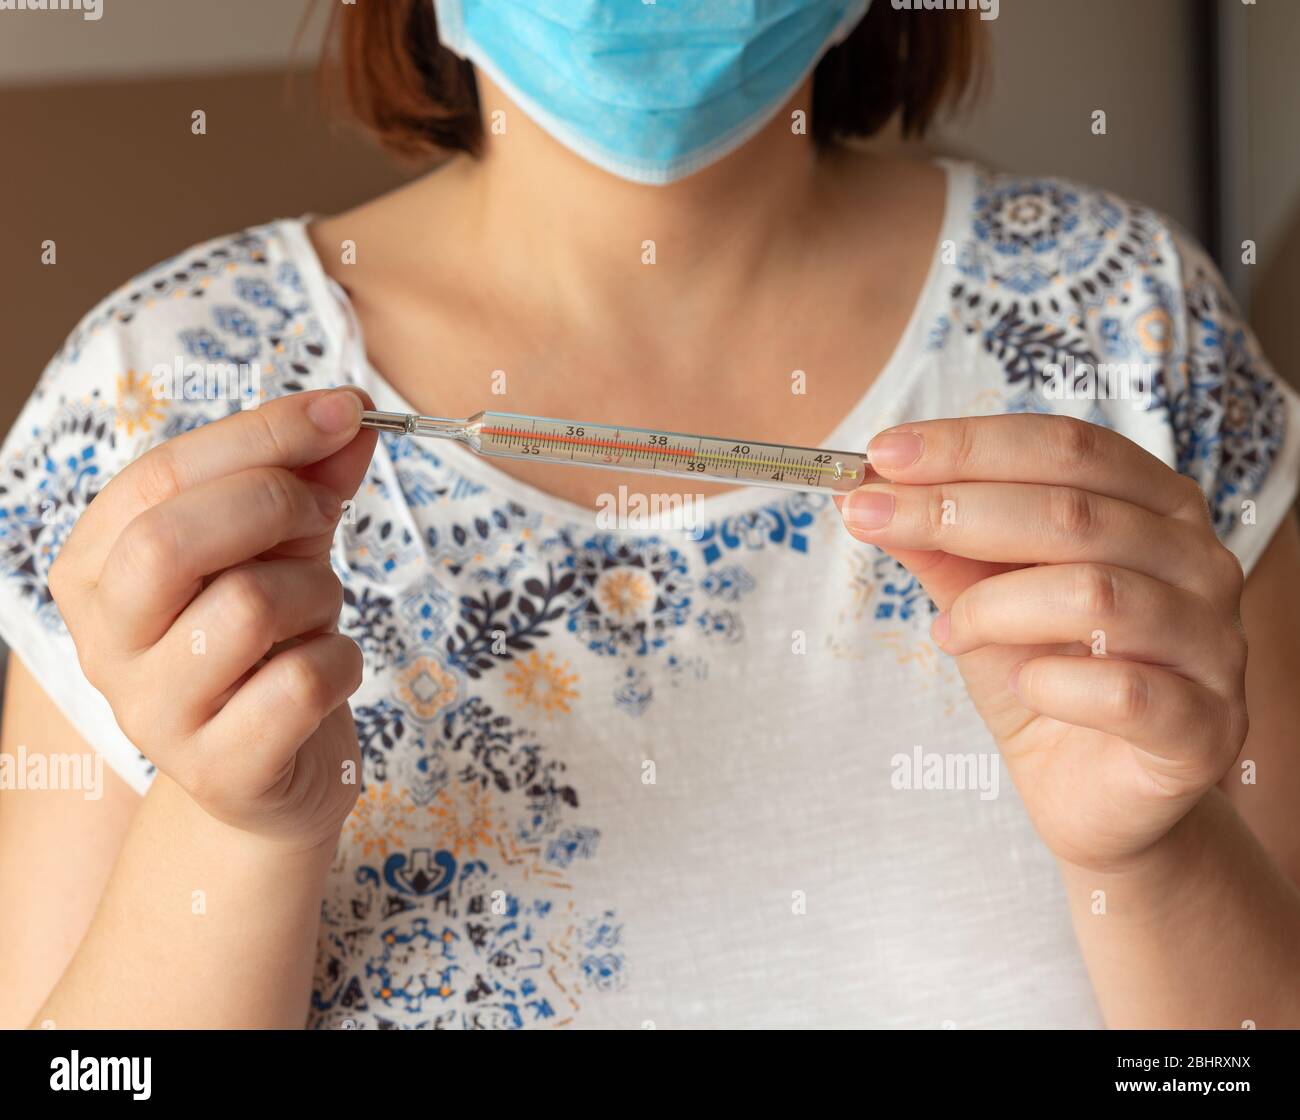 Coronavirus COVID-19 concept with female wearing mask holding thermometer with high temperature. Woman in domestic clothes, holds analogue medical Stock Photo